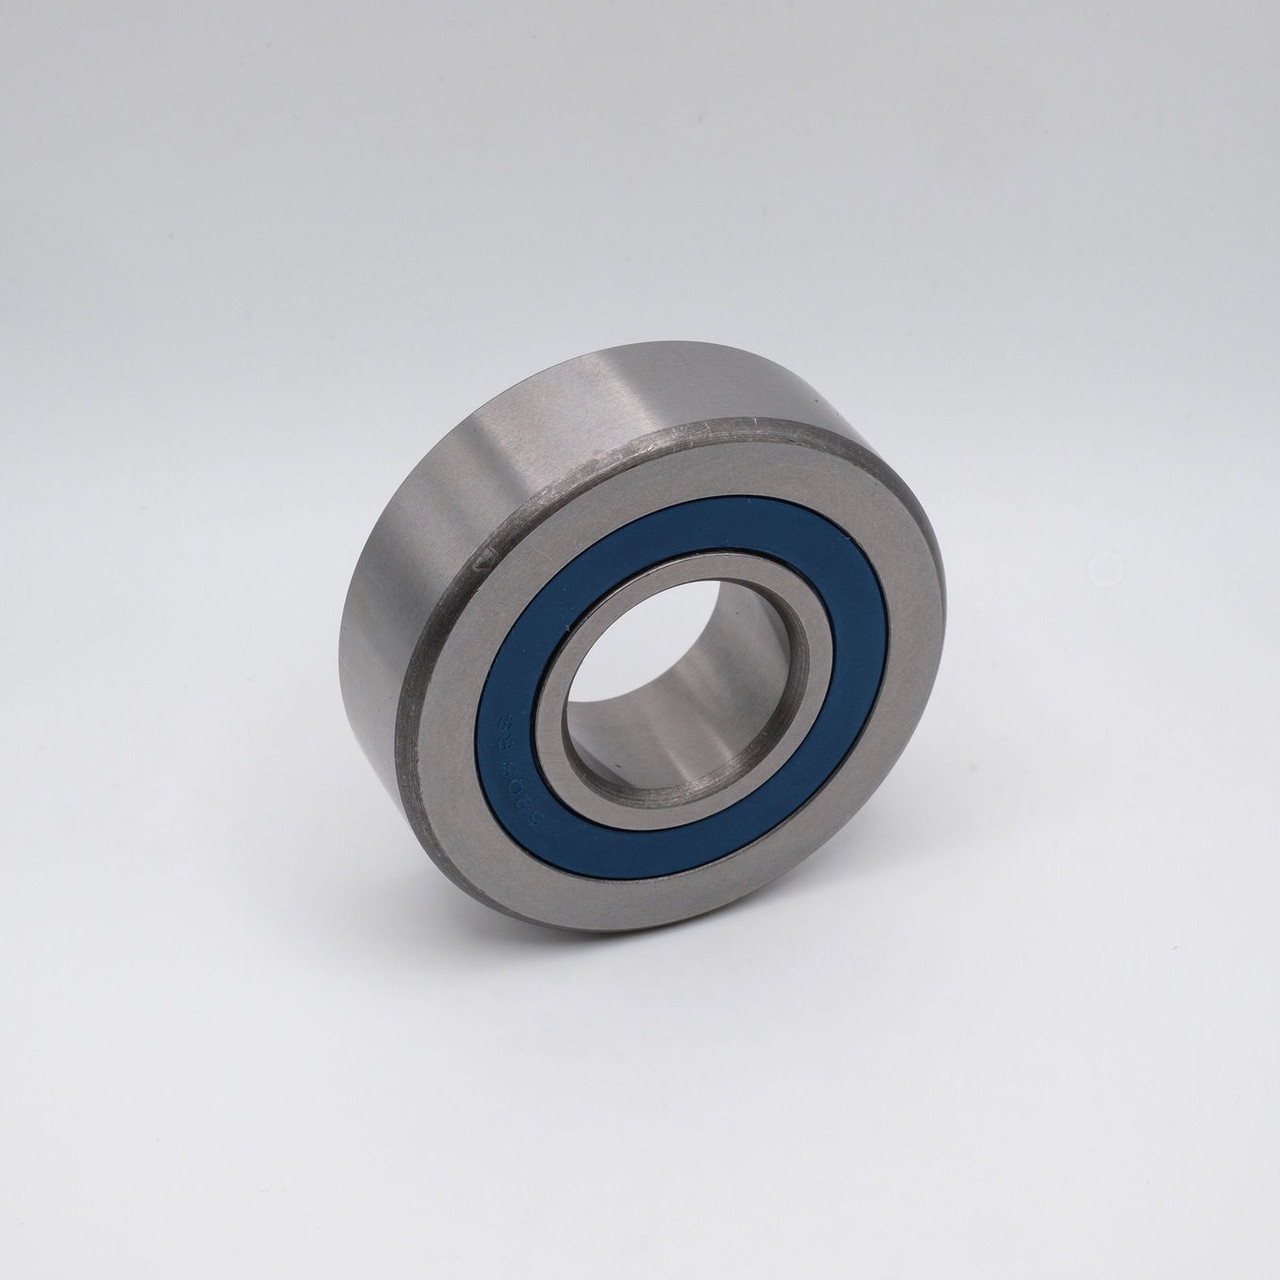 LR5200NPPU Track Roller Ball Bearing 10x32x14mm Back Left Angled View